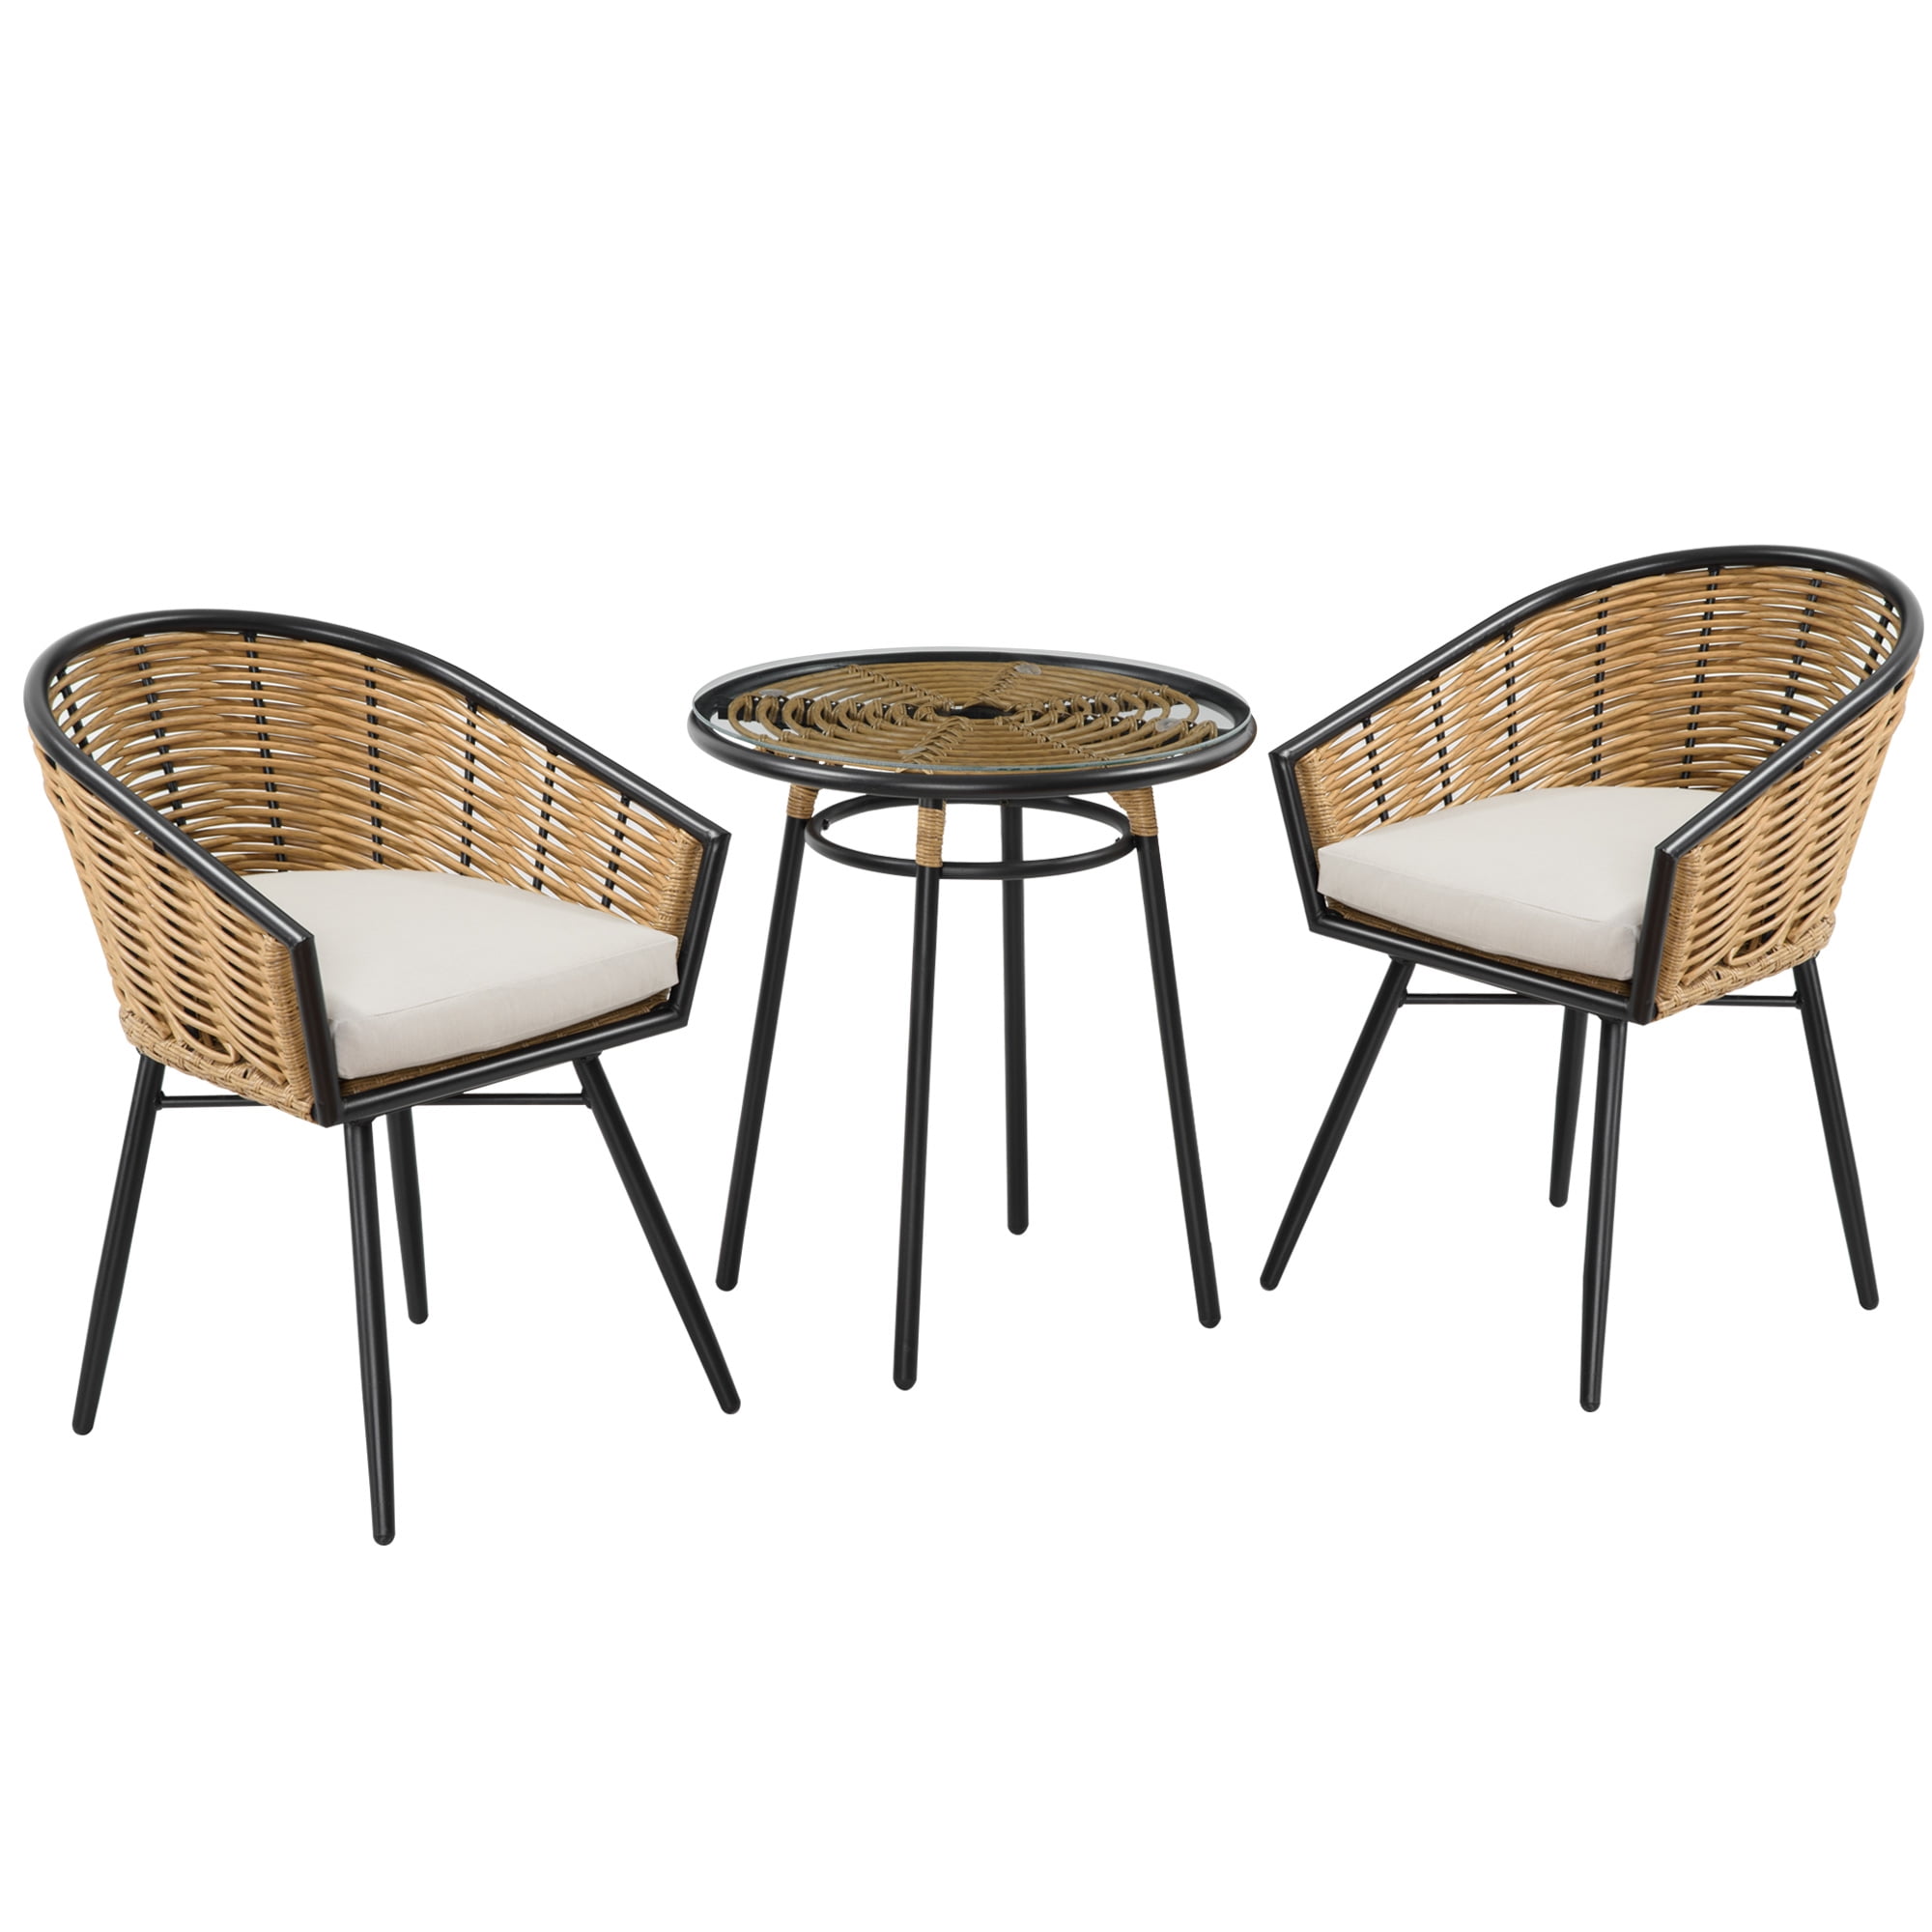 Outsunny 3pcs Rattan Rocking Chair Table Set Outdoor Wicker Furniture 2 Chair 1 Coffee Table Backyard Deck Patio Bistro Set Dark Grey 